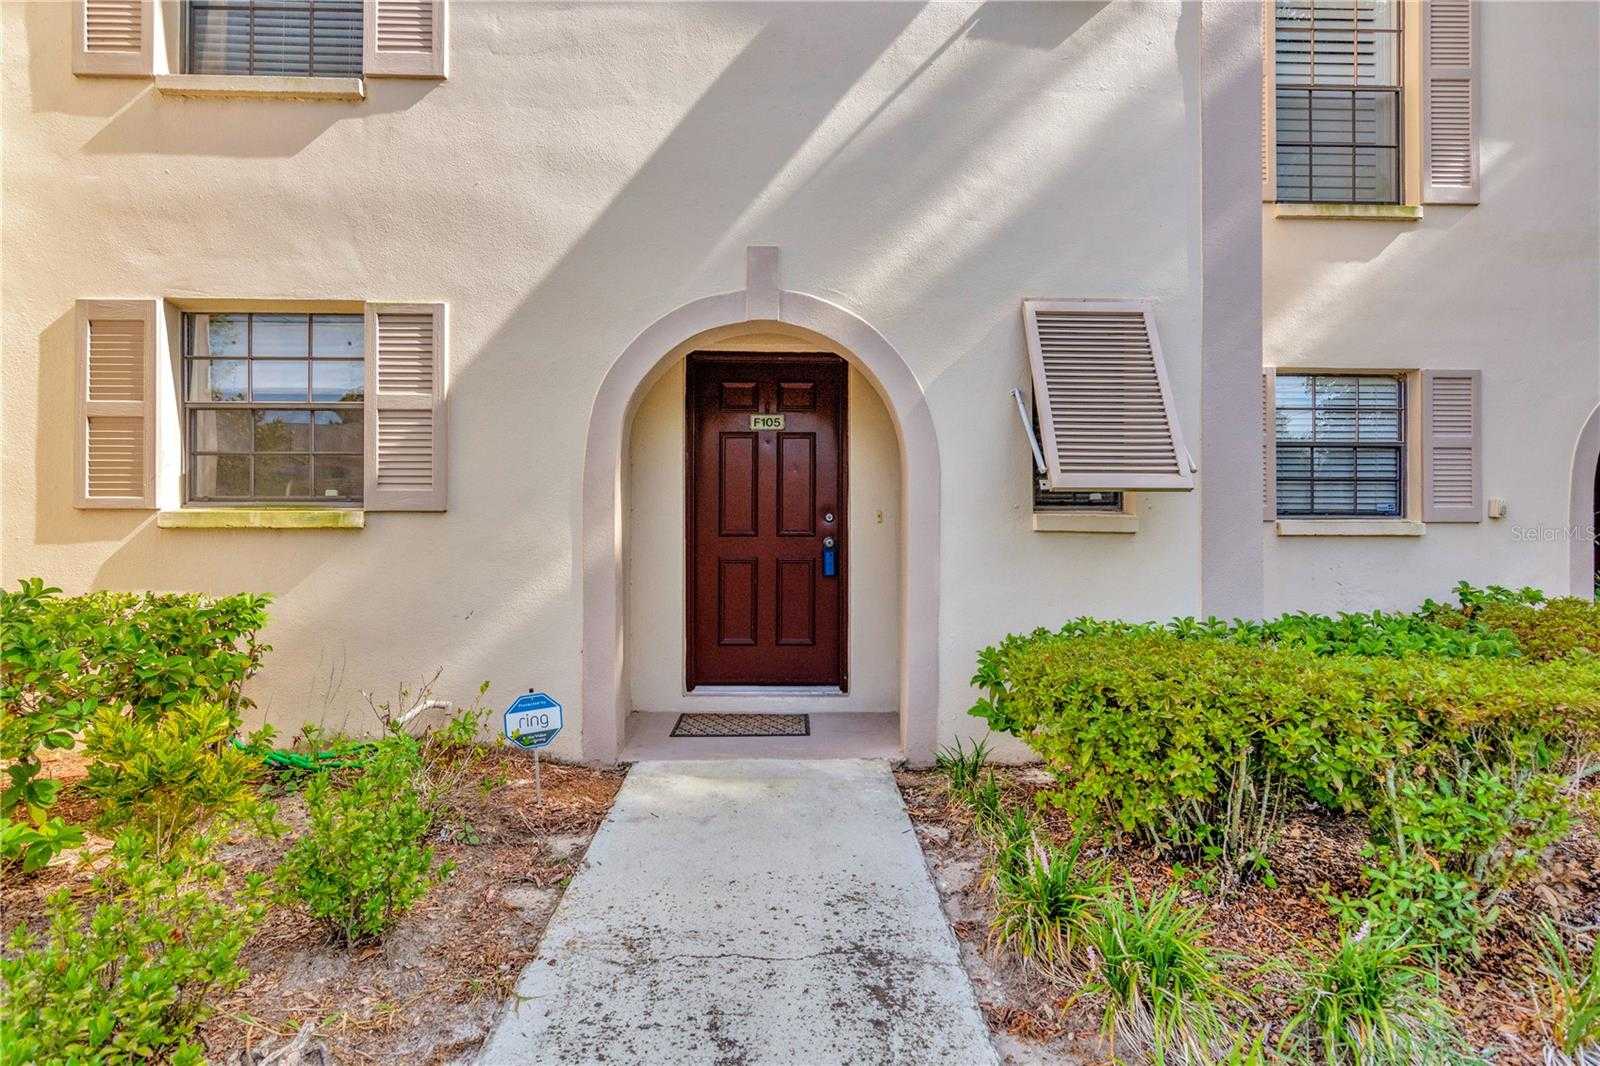 View CLEARWATER, FL 33762 townhome